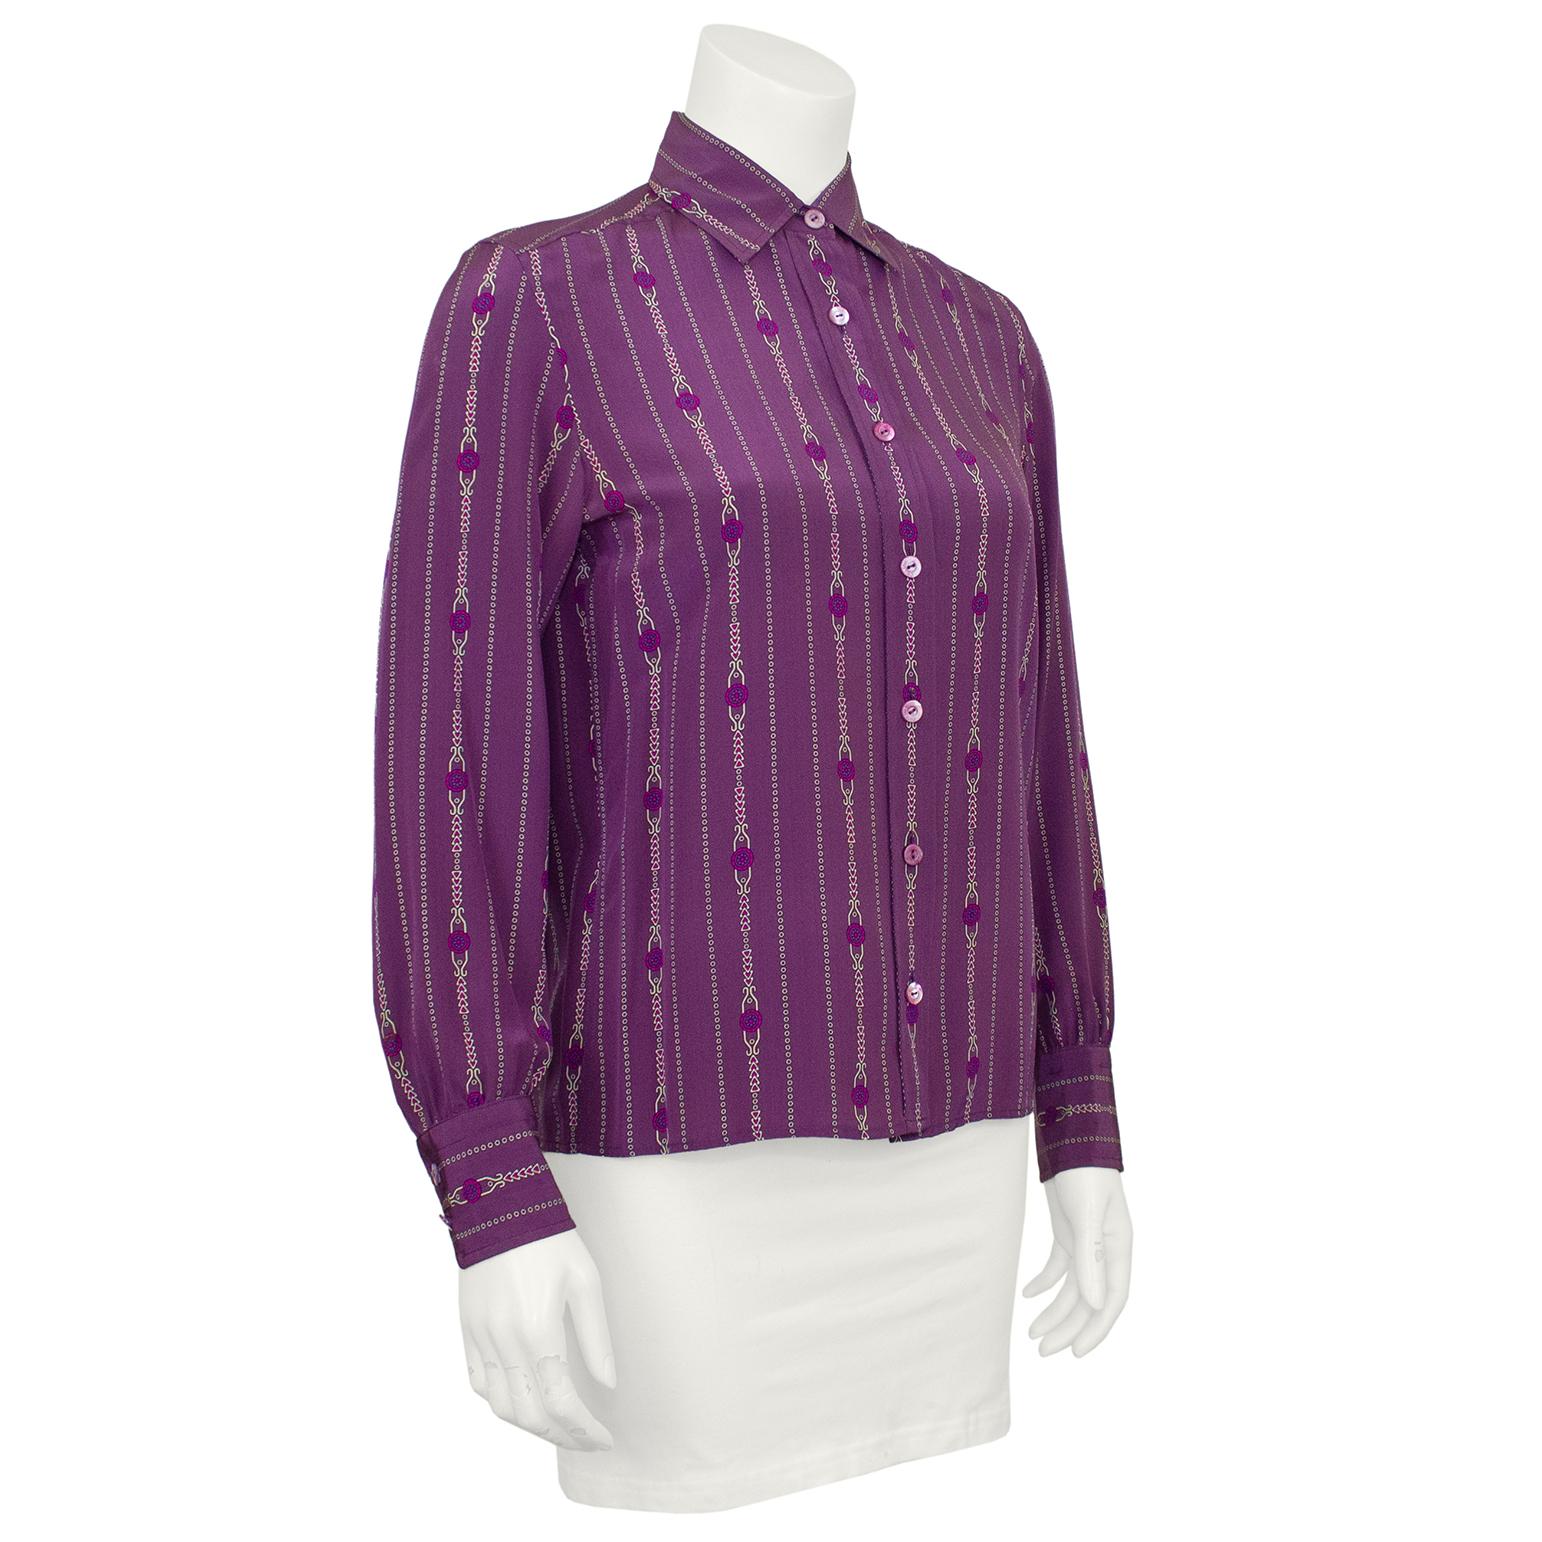 Beautiful Celine silk blouse from the 1970s. The purple blouse features a unique chain print throughout in cream and magenta. Buttons up the front. In excellent condition, fits like a US 2/4, marked FR 38

Shoulder 15